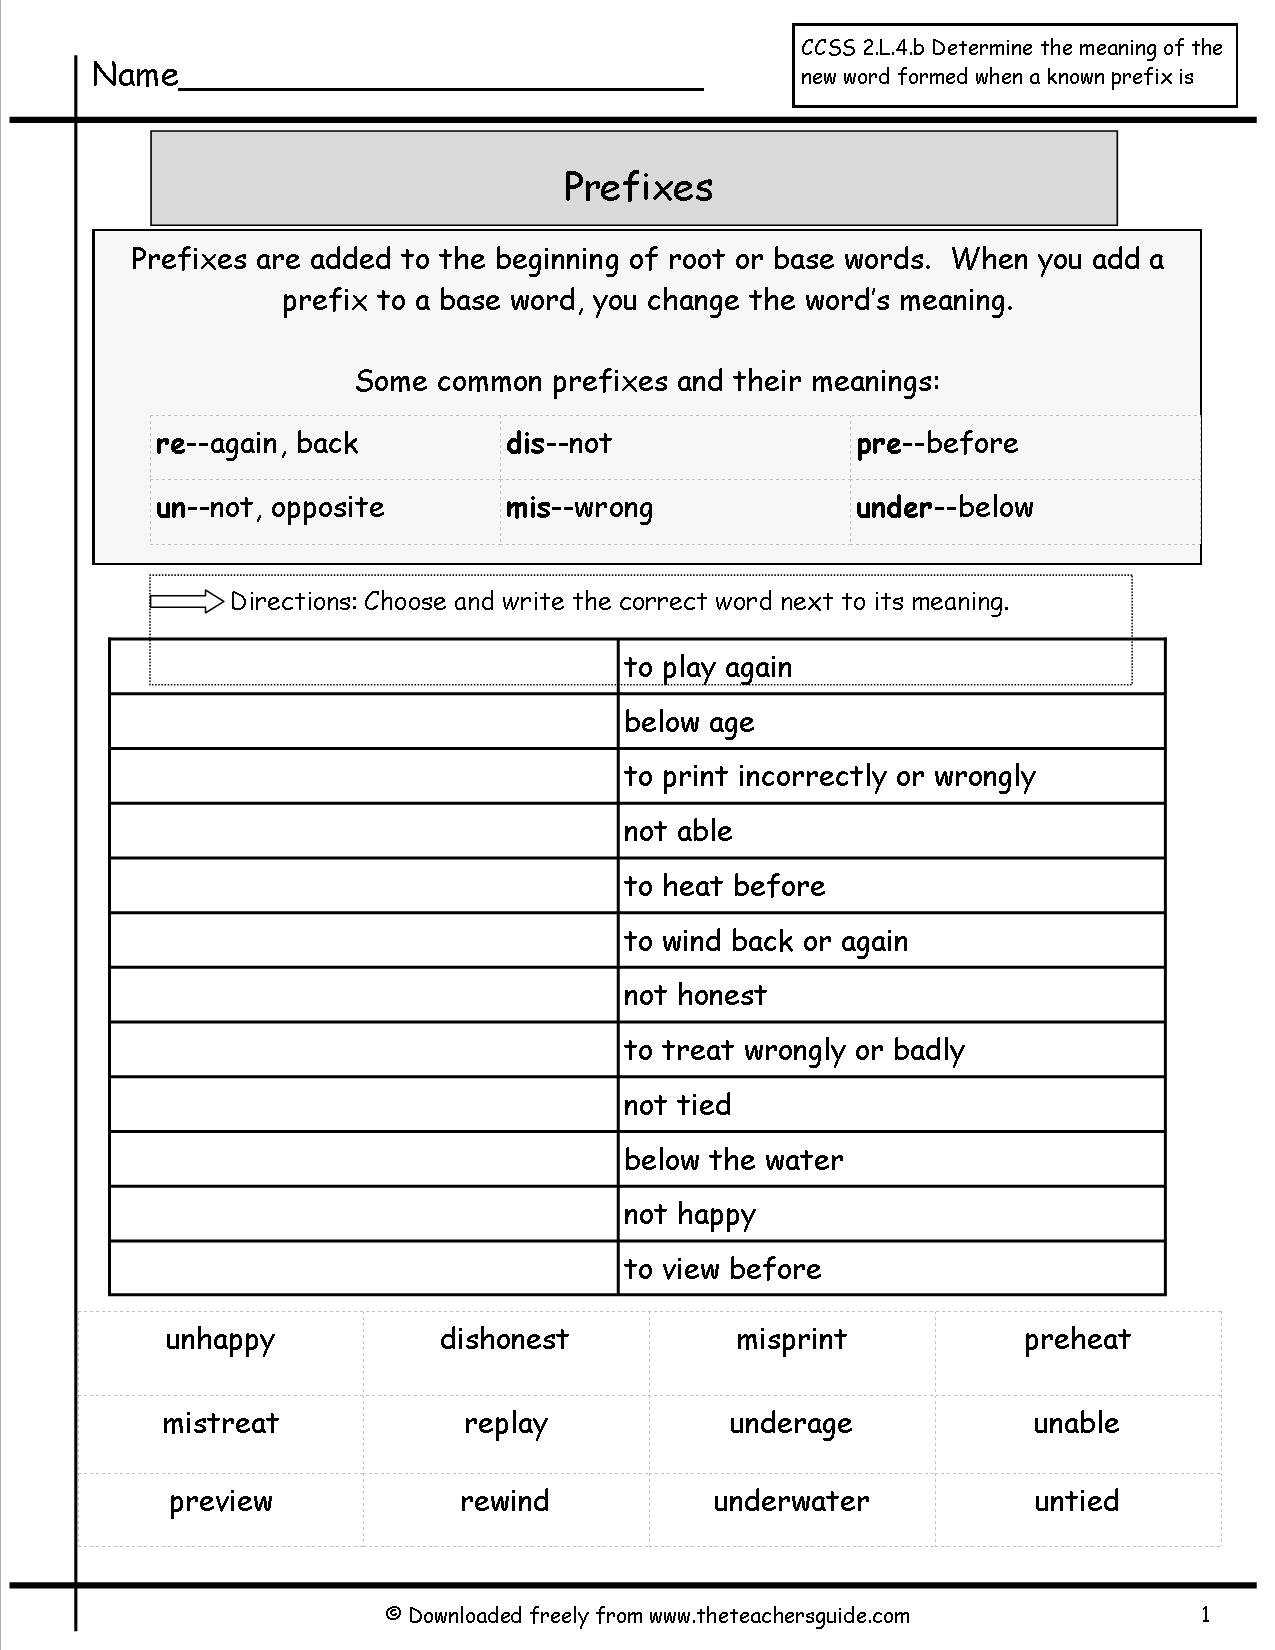 Free Prefixes And Suffixes Worksheets From The Teacher's Guide Together With Prefix And Suffix Worksheets 5Th Grade